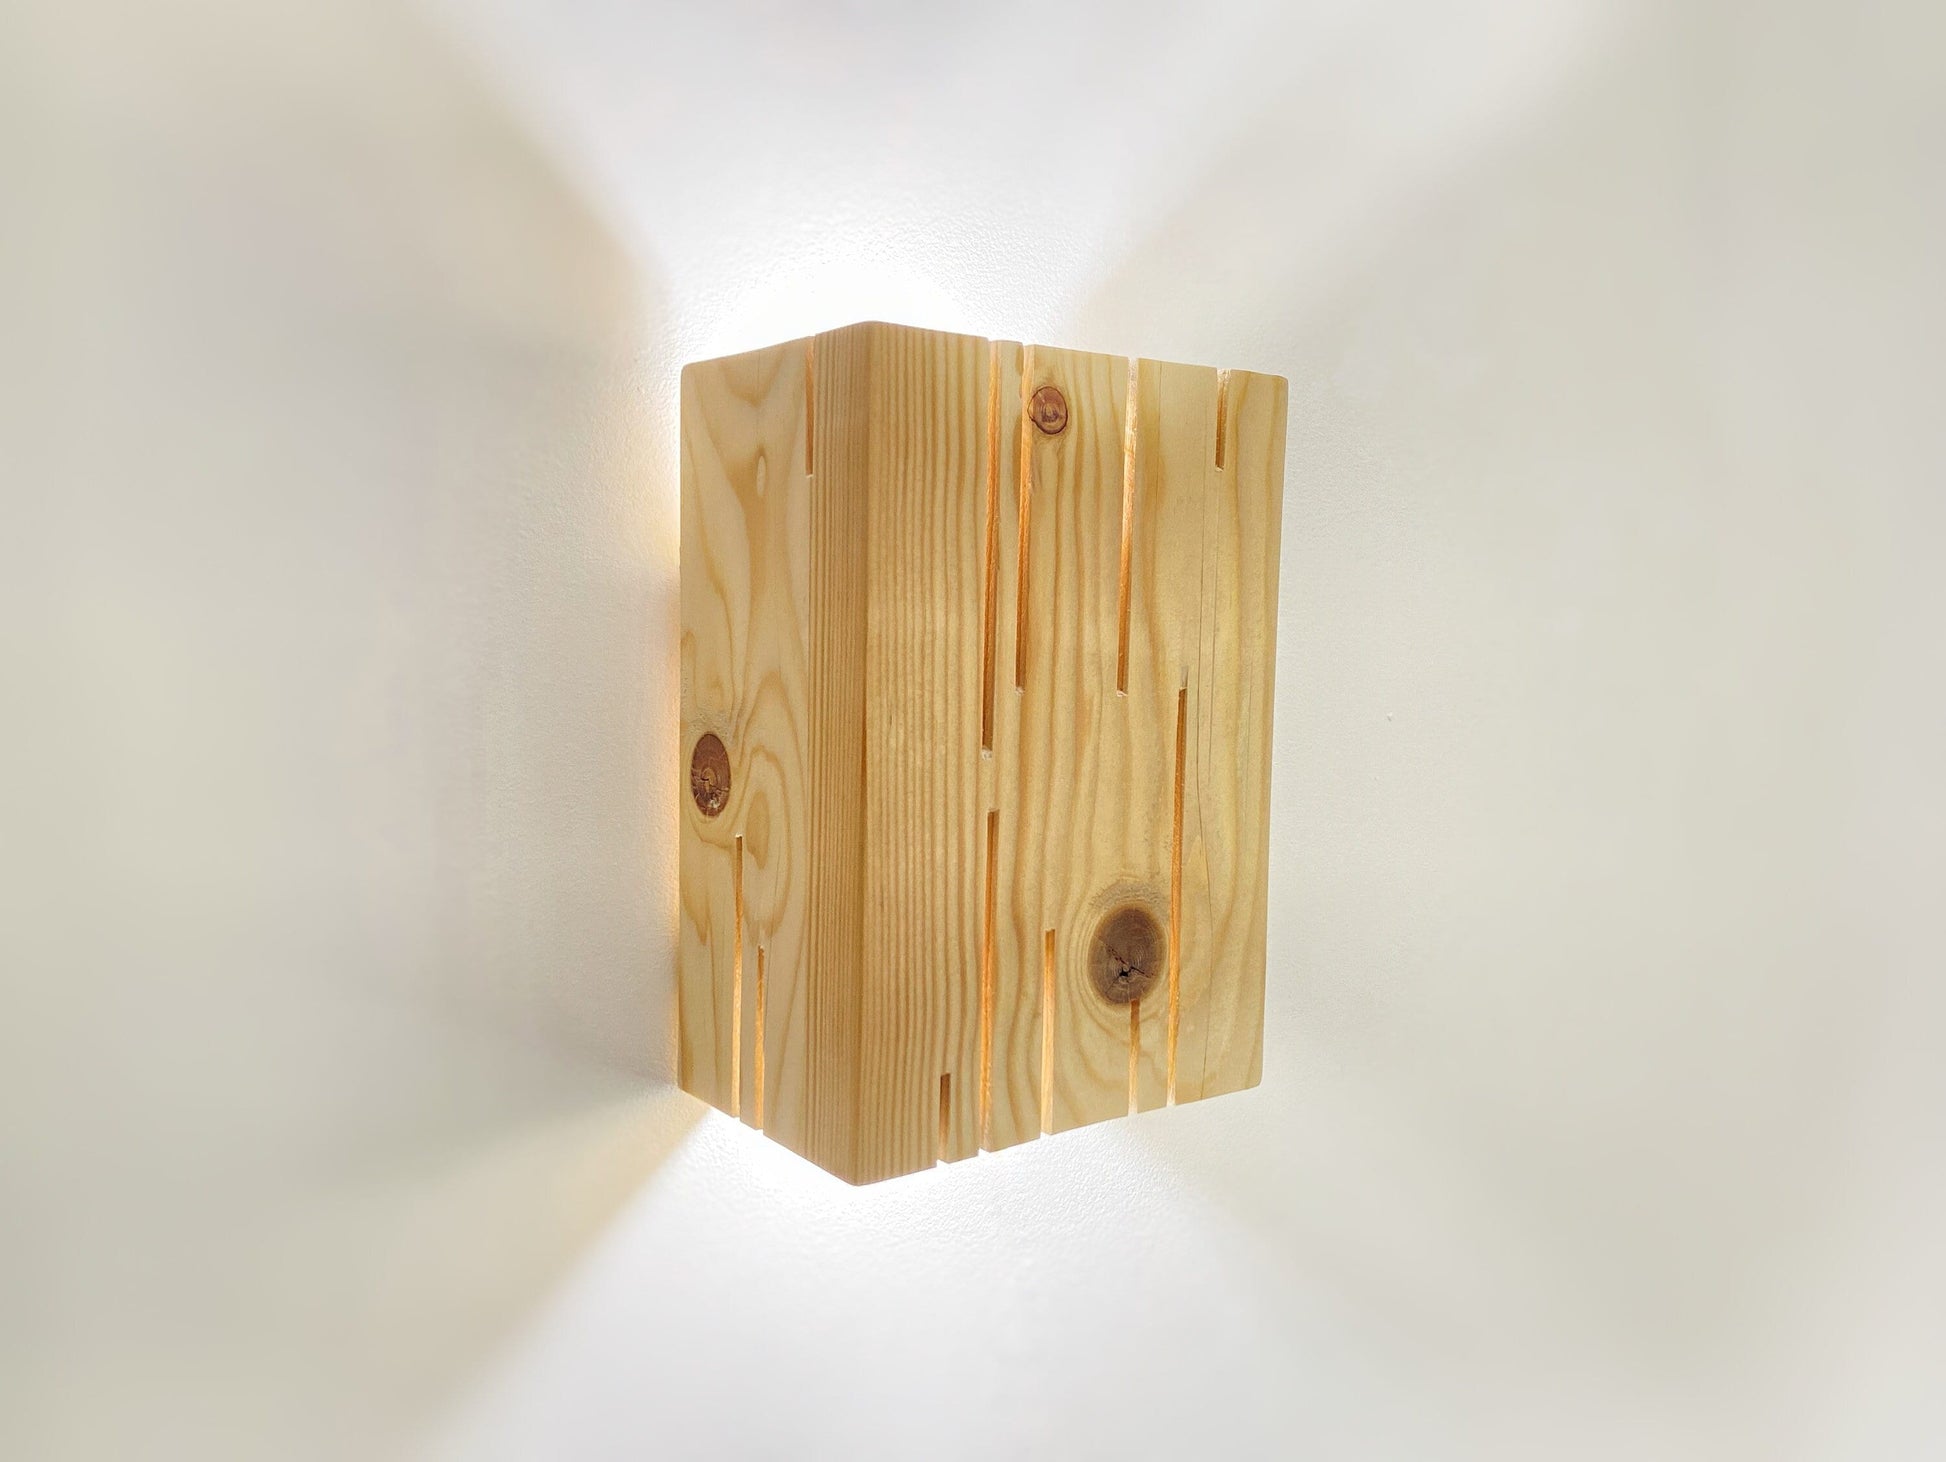 Wall sconce, plug in wall sconce, wall bedside lamp, led light, wall light, wood sconce, wood pendant light, lampshade, size 8.26x5.9x3.93